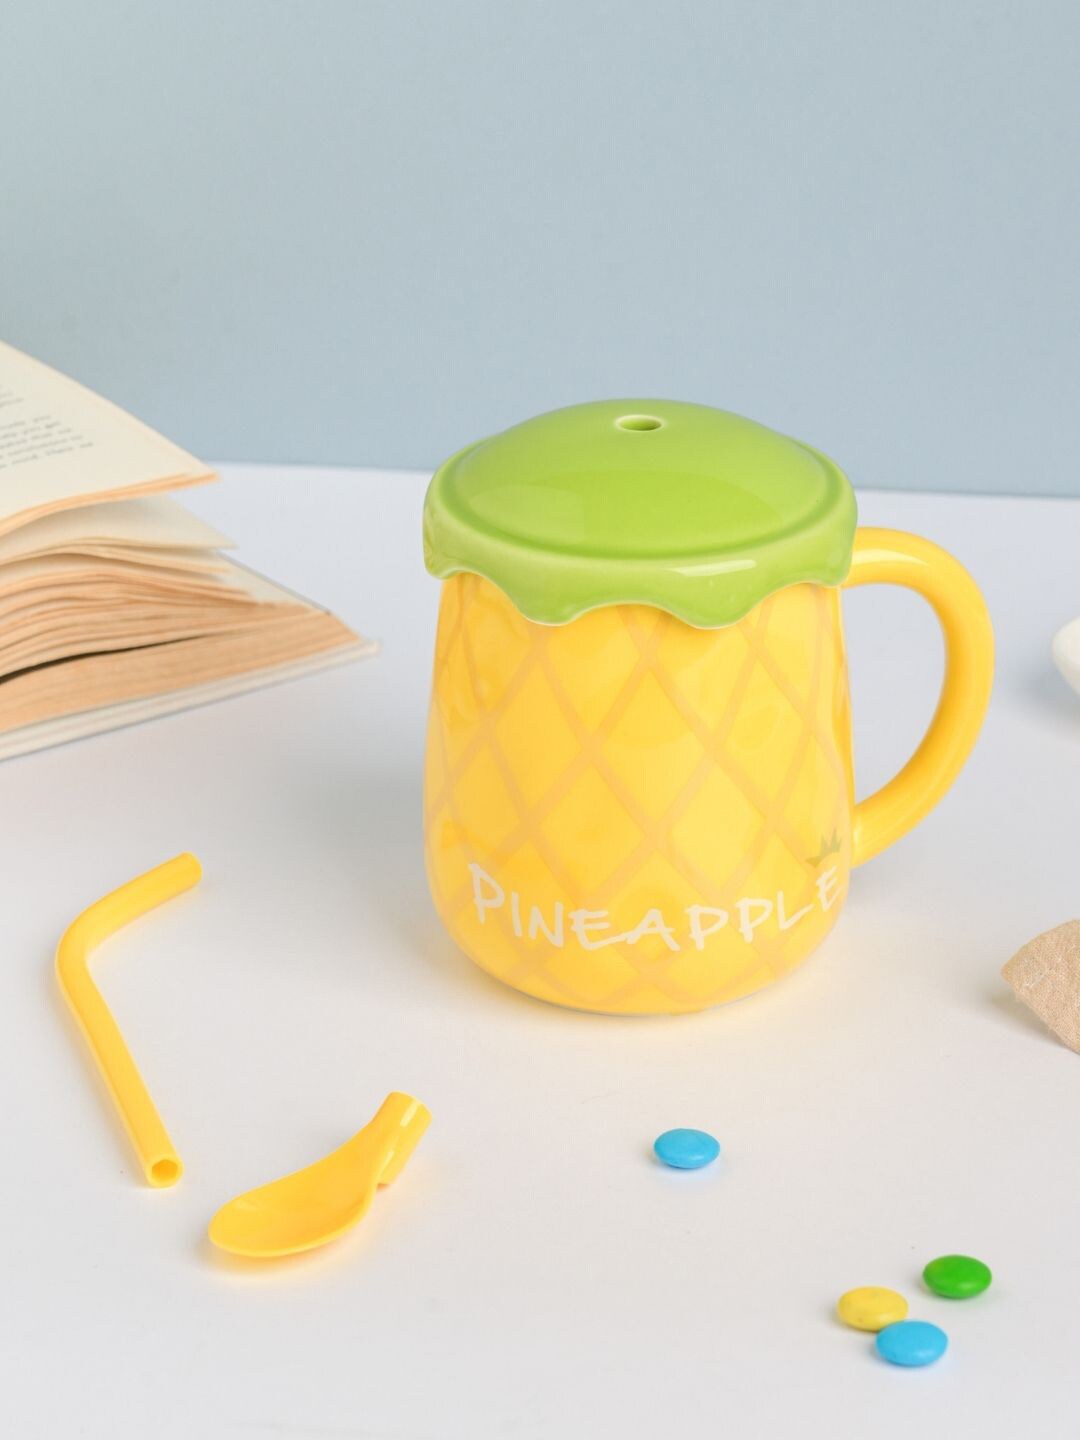 Nestasia Yellow Fruit Ceramic Cup with Lid & Spoon Price in India